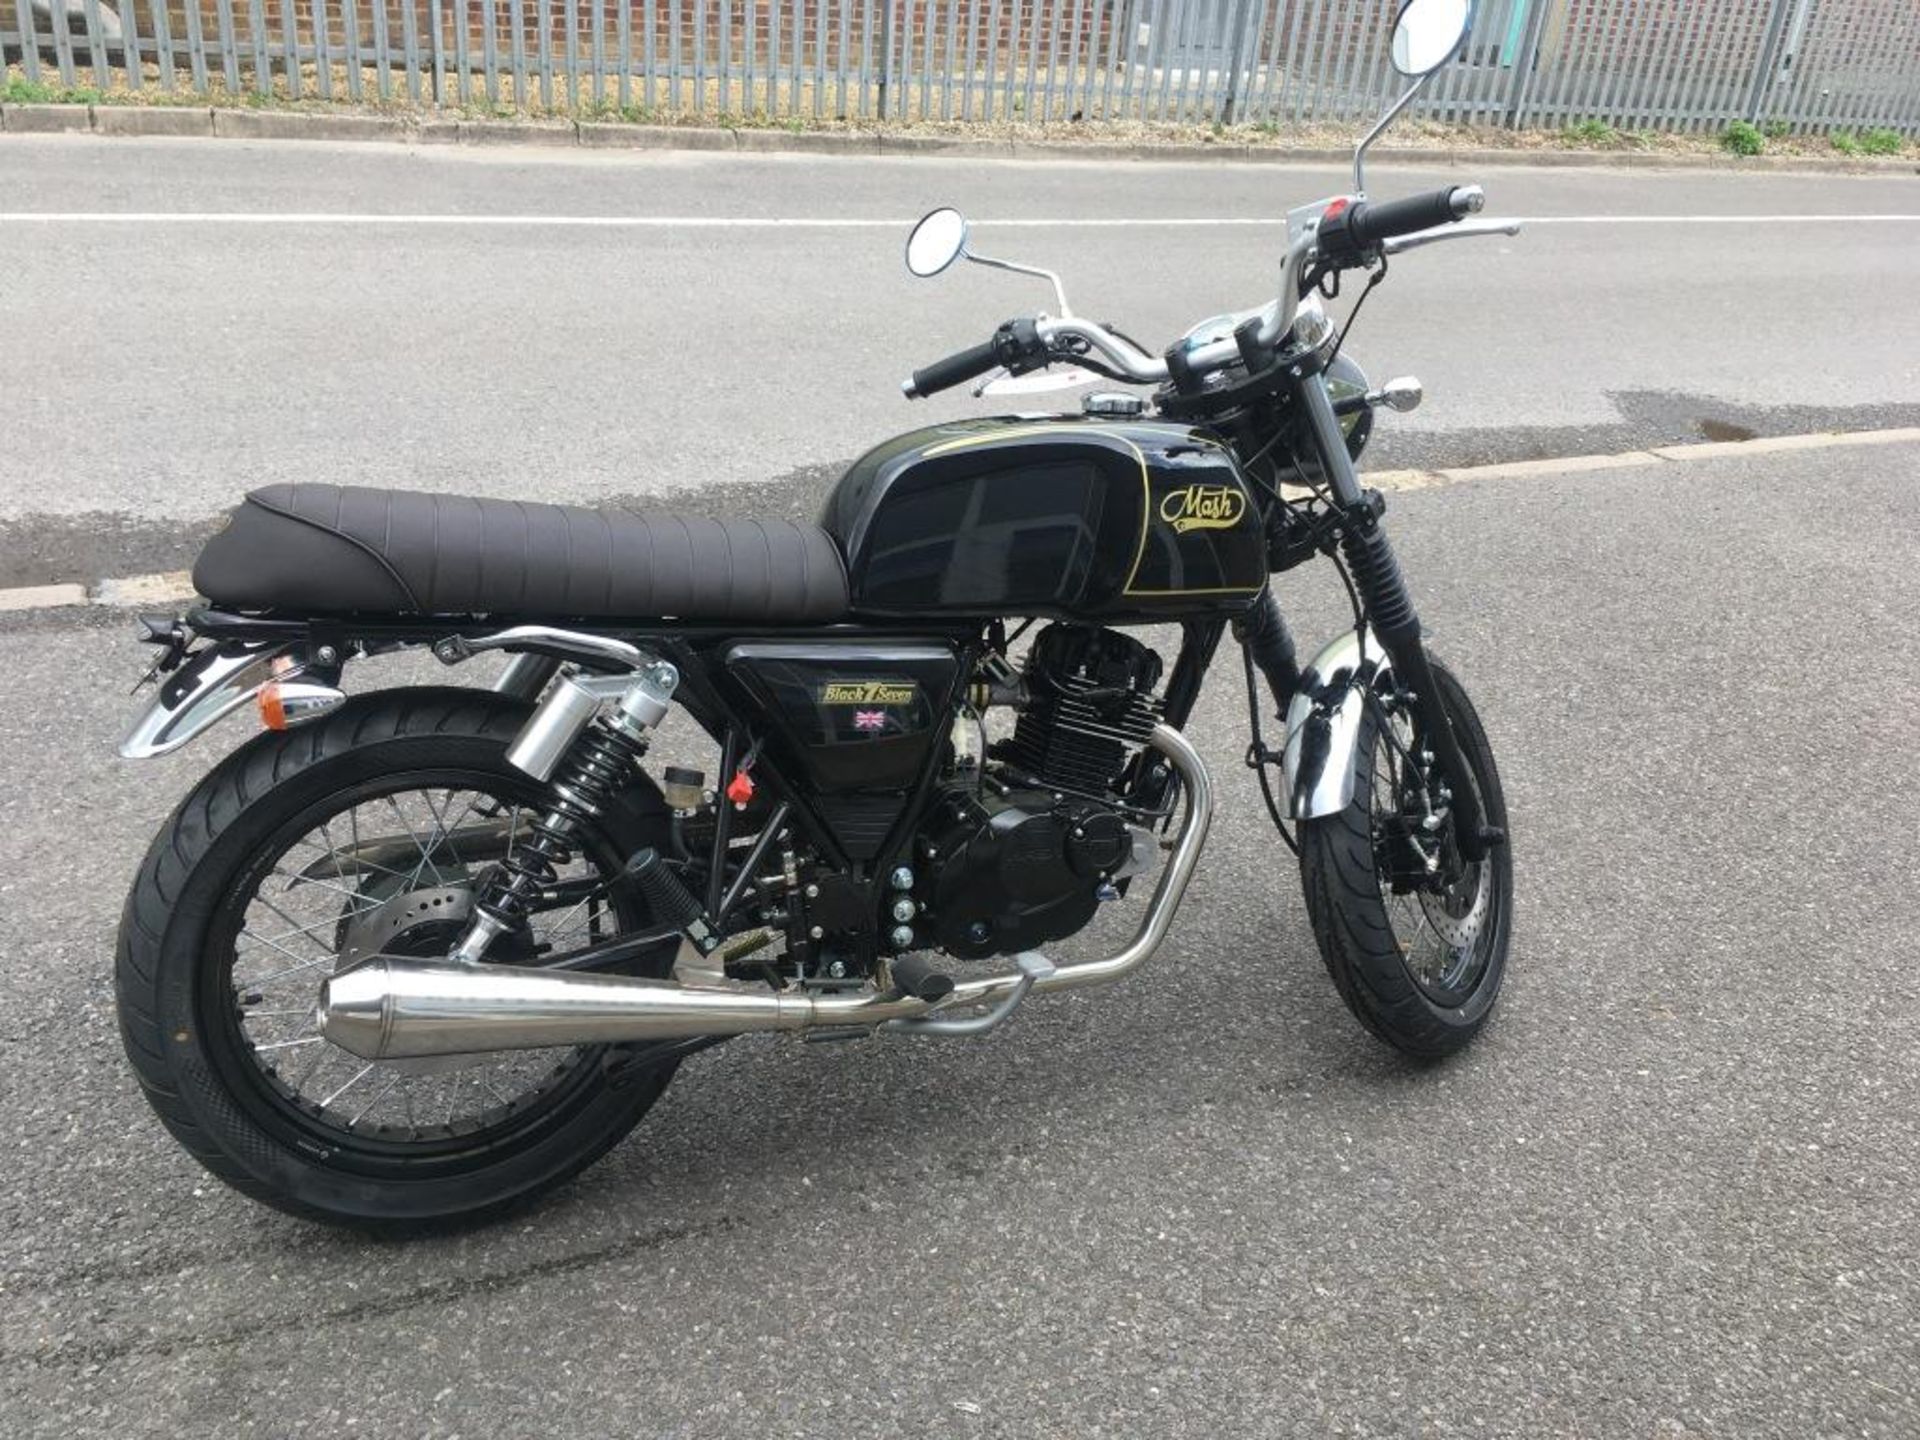 Mash Black 7 125 motorcycle, Unregistered and no certificate of conformity held, VIN: - Image 3 of 9